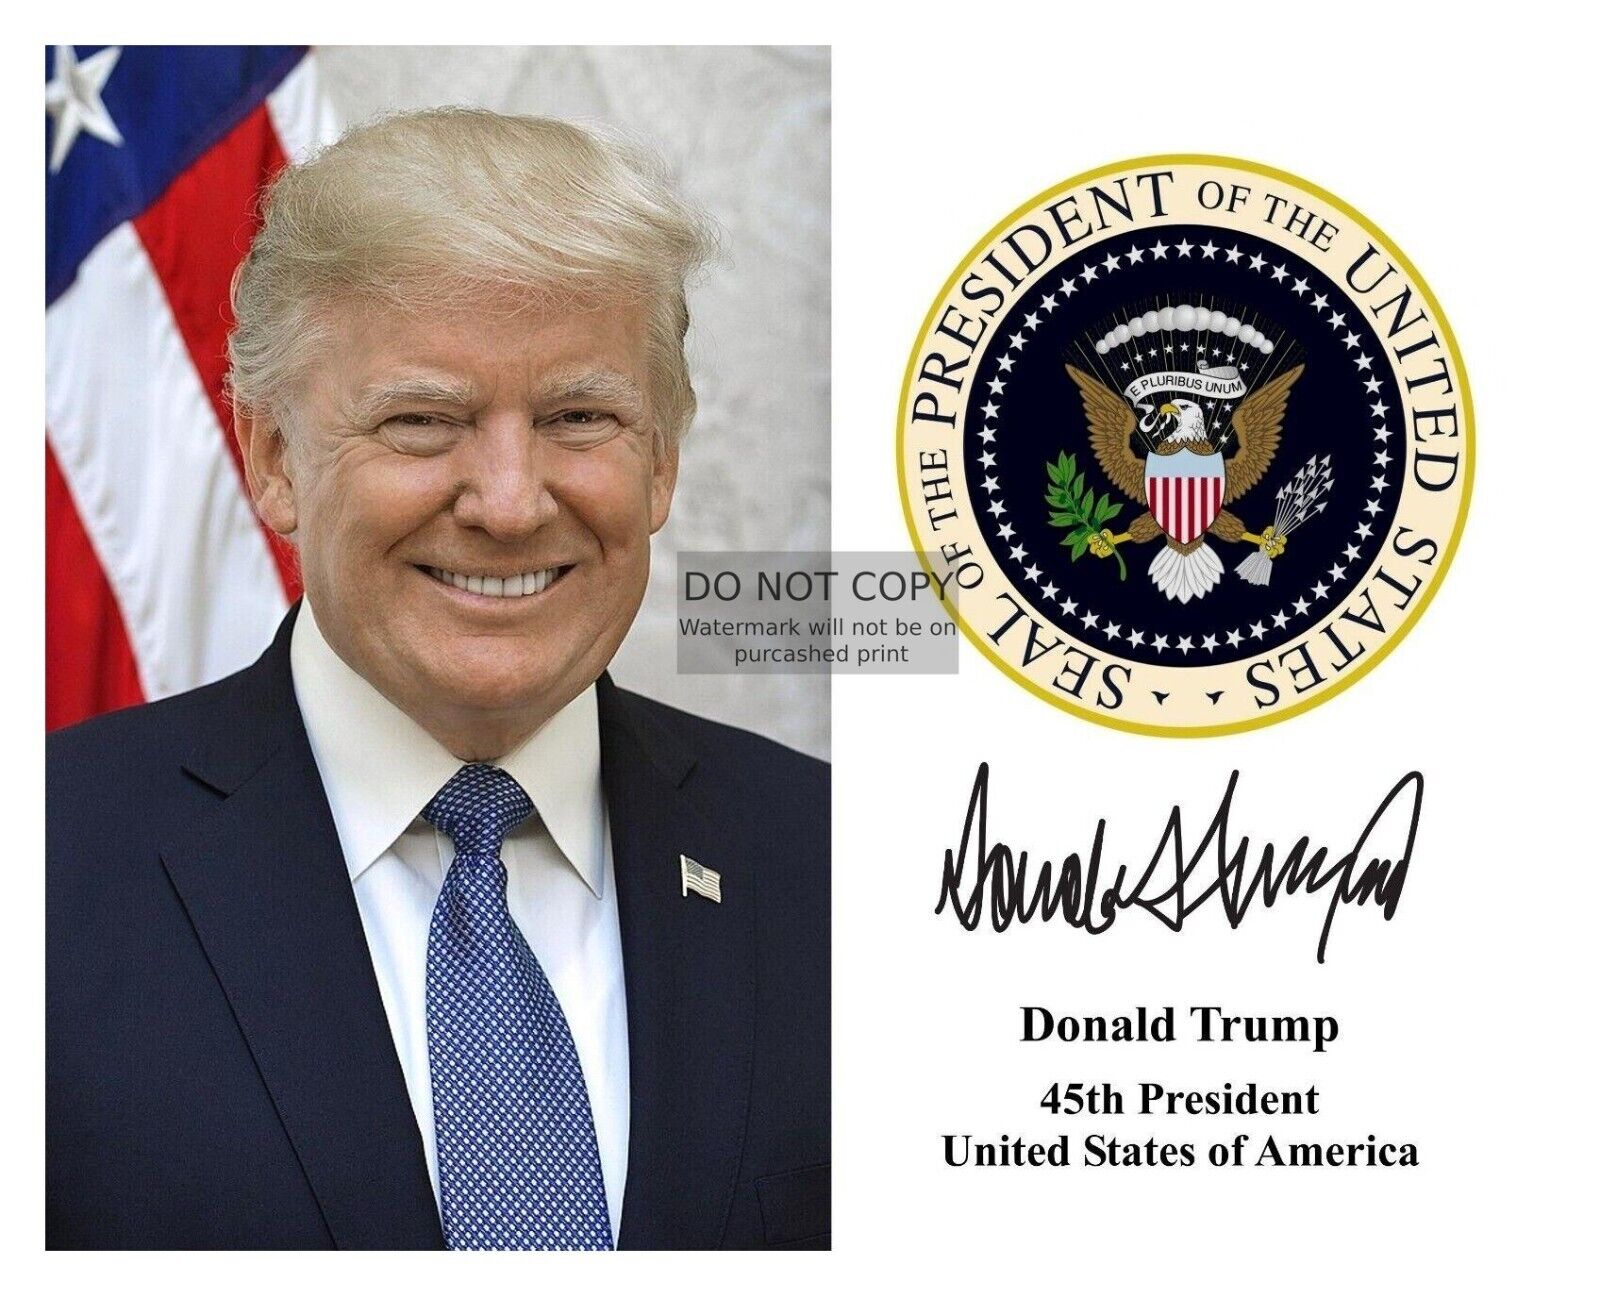 PRESIDENT DONALD TRUMP PRESIDENTIAL SEAL AUTOGRAPHED 8X10 PHOTOGRAPH